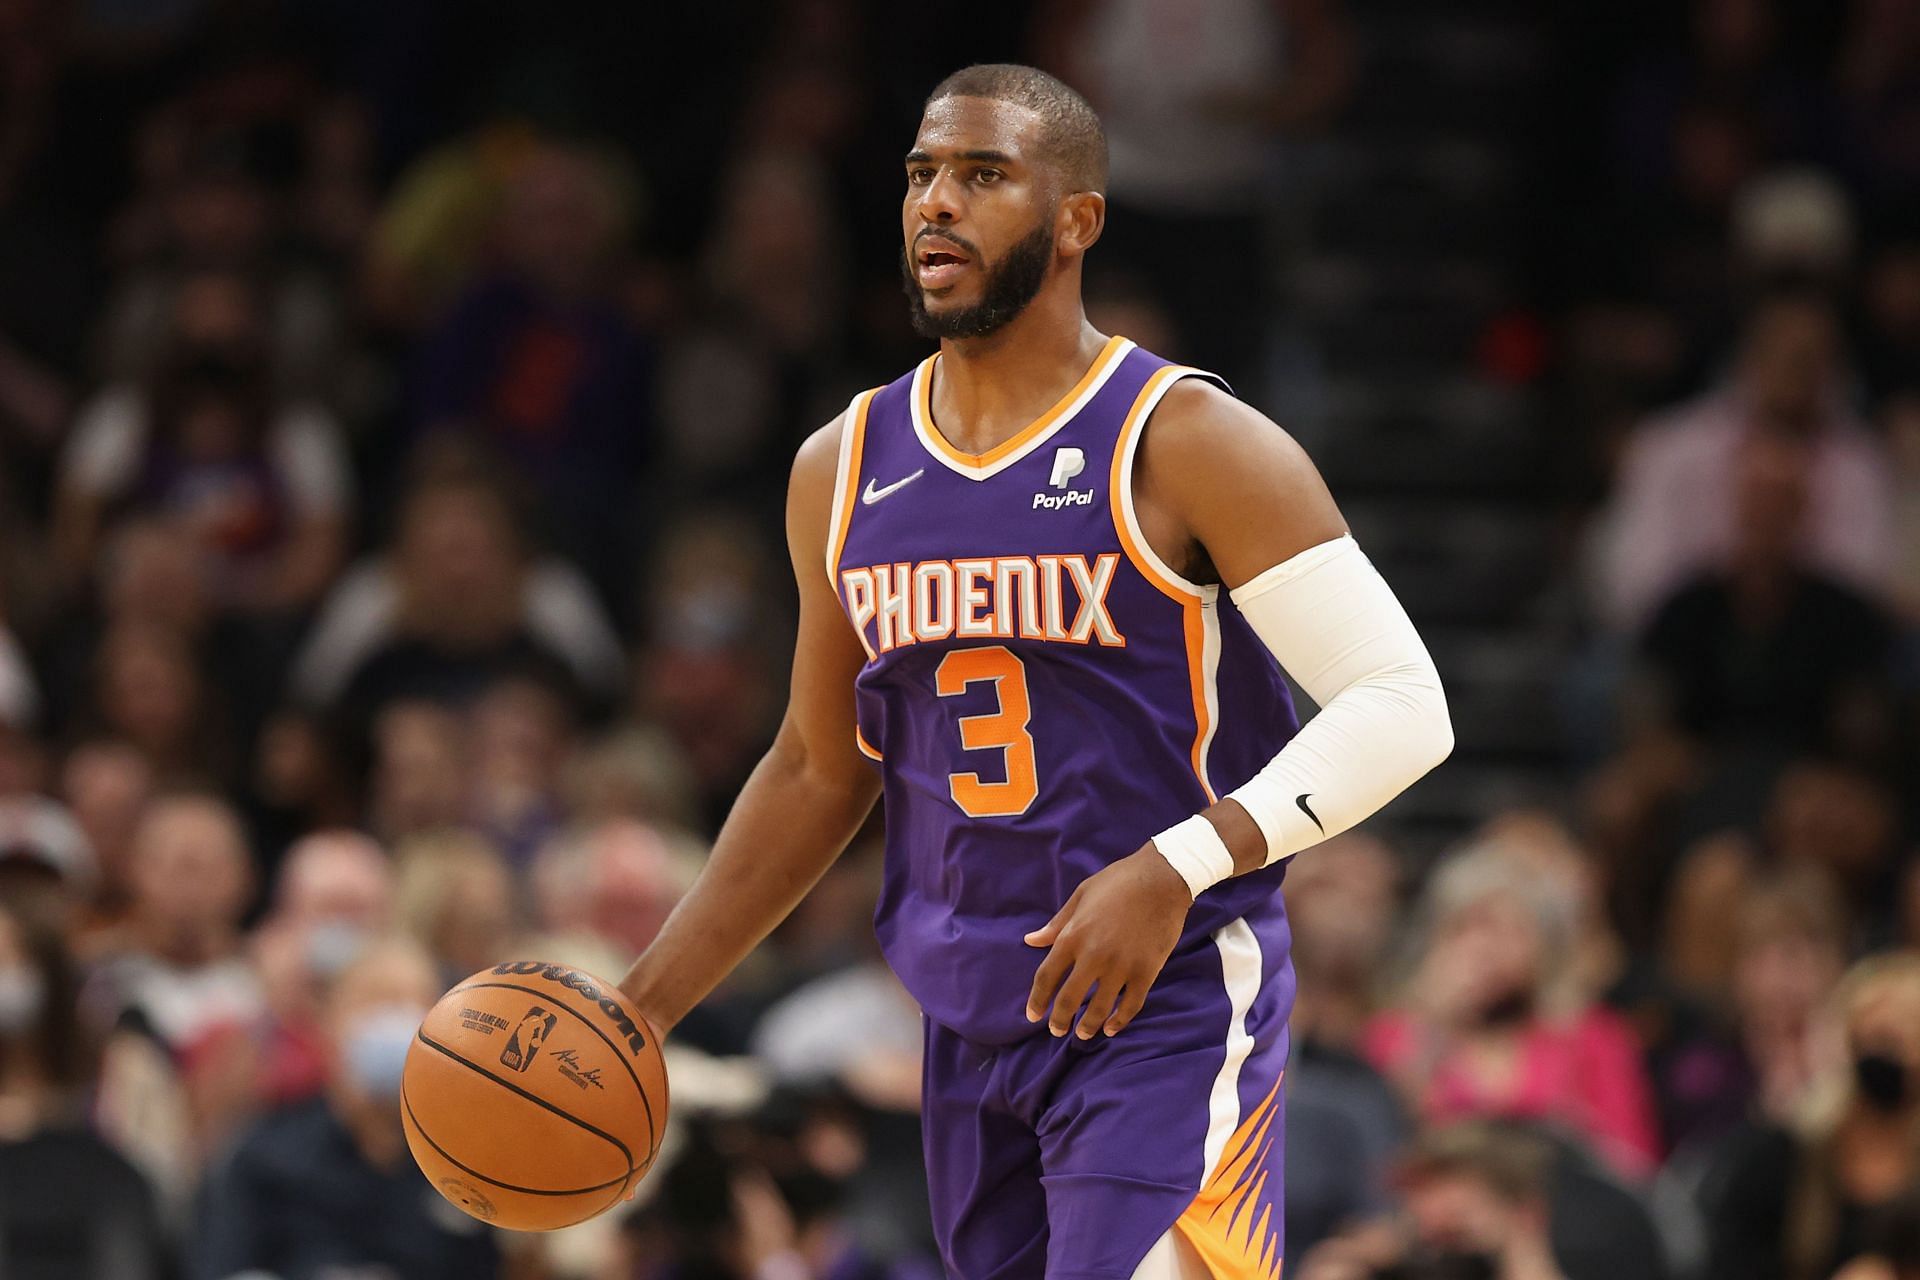 Chris Paul of the Phoenix Suns has been instrumental for Monty Williams